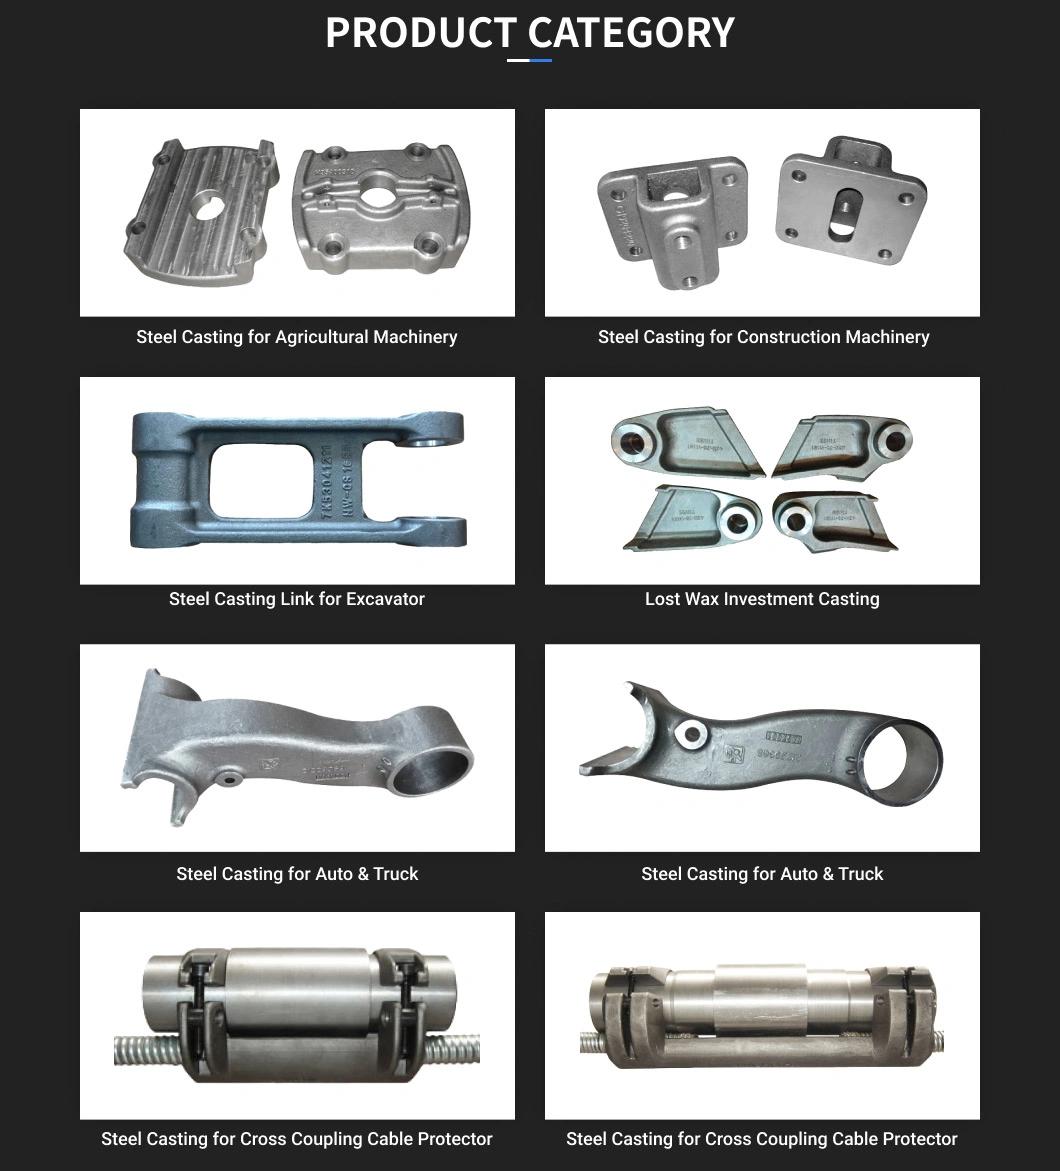 Lost Wax Investment Carbon Steel Safety Cast Foundry with Cheap Price